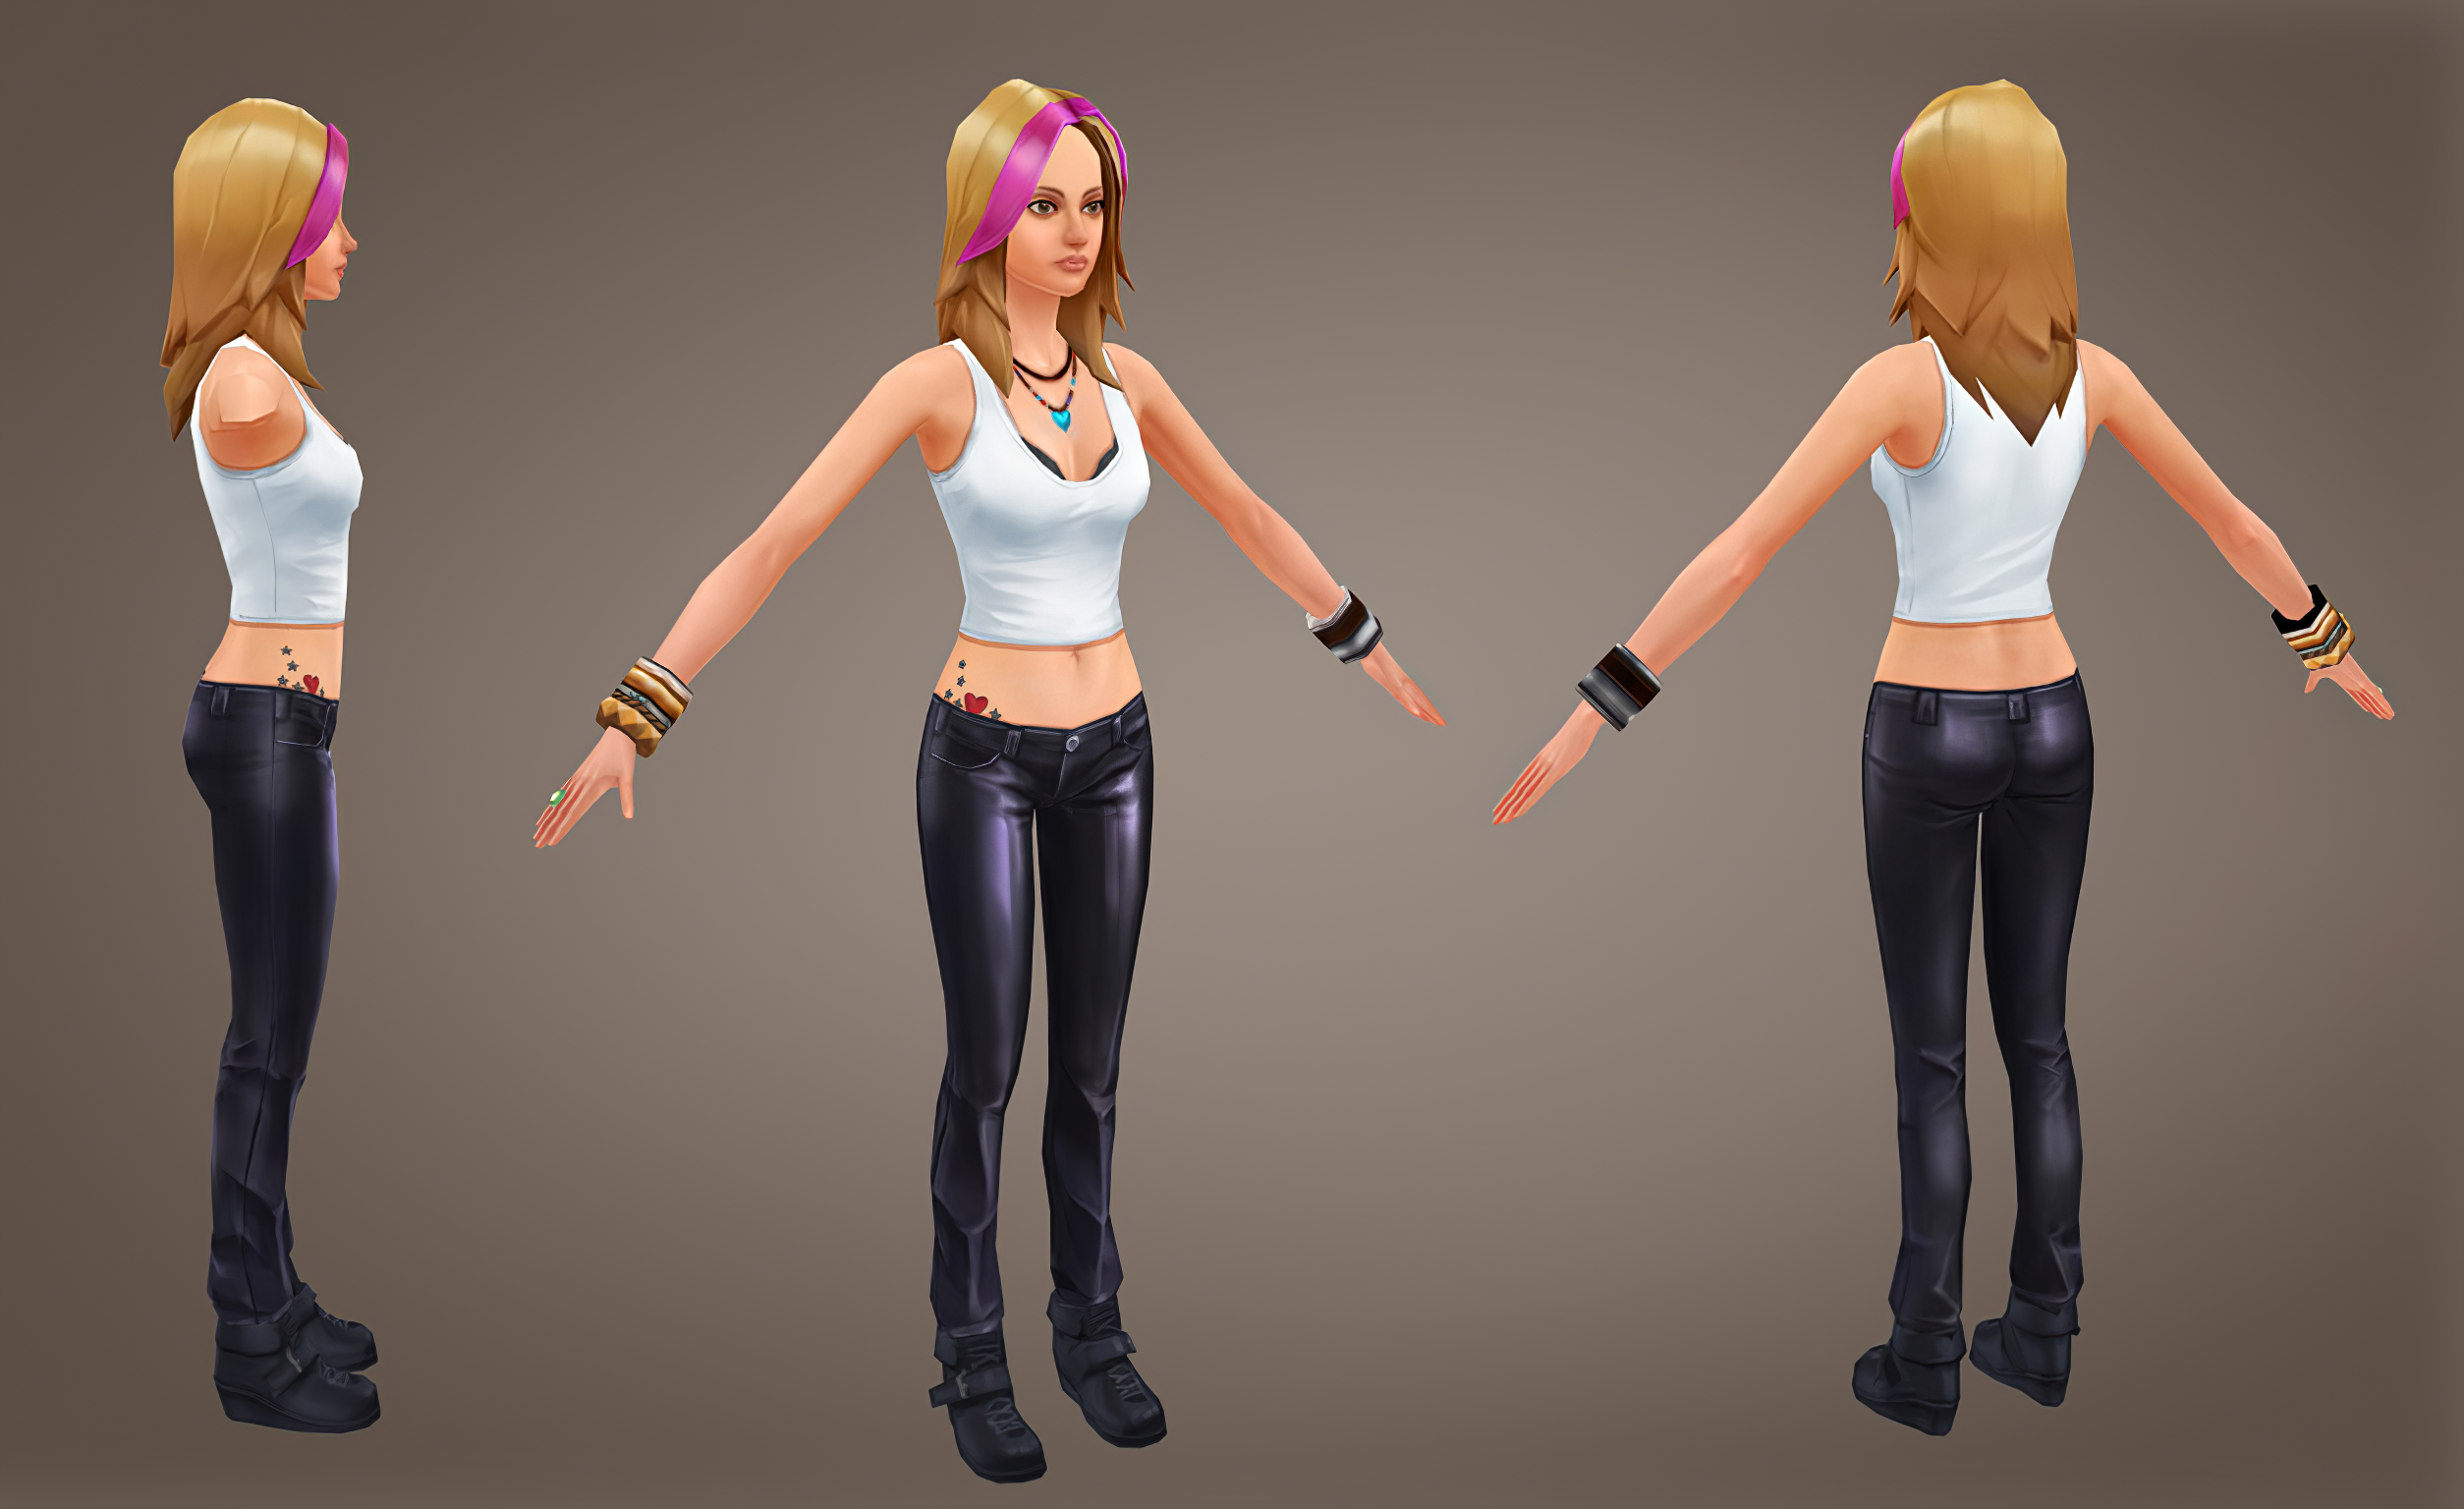 The Sims 4: Early Character Prototypes by Brian Steffel.